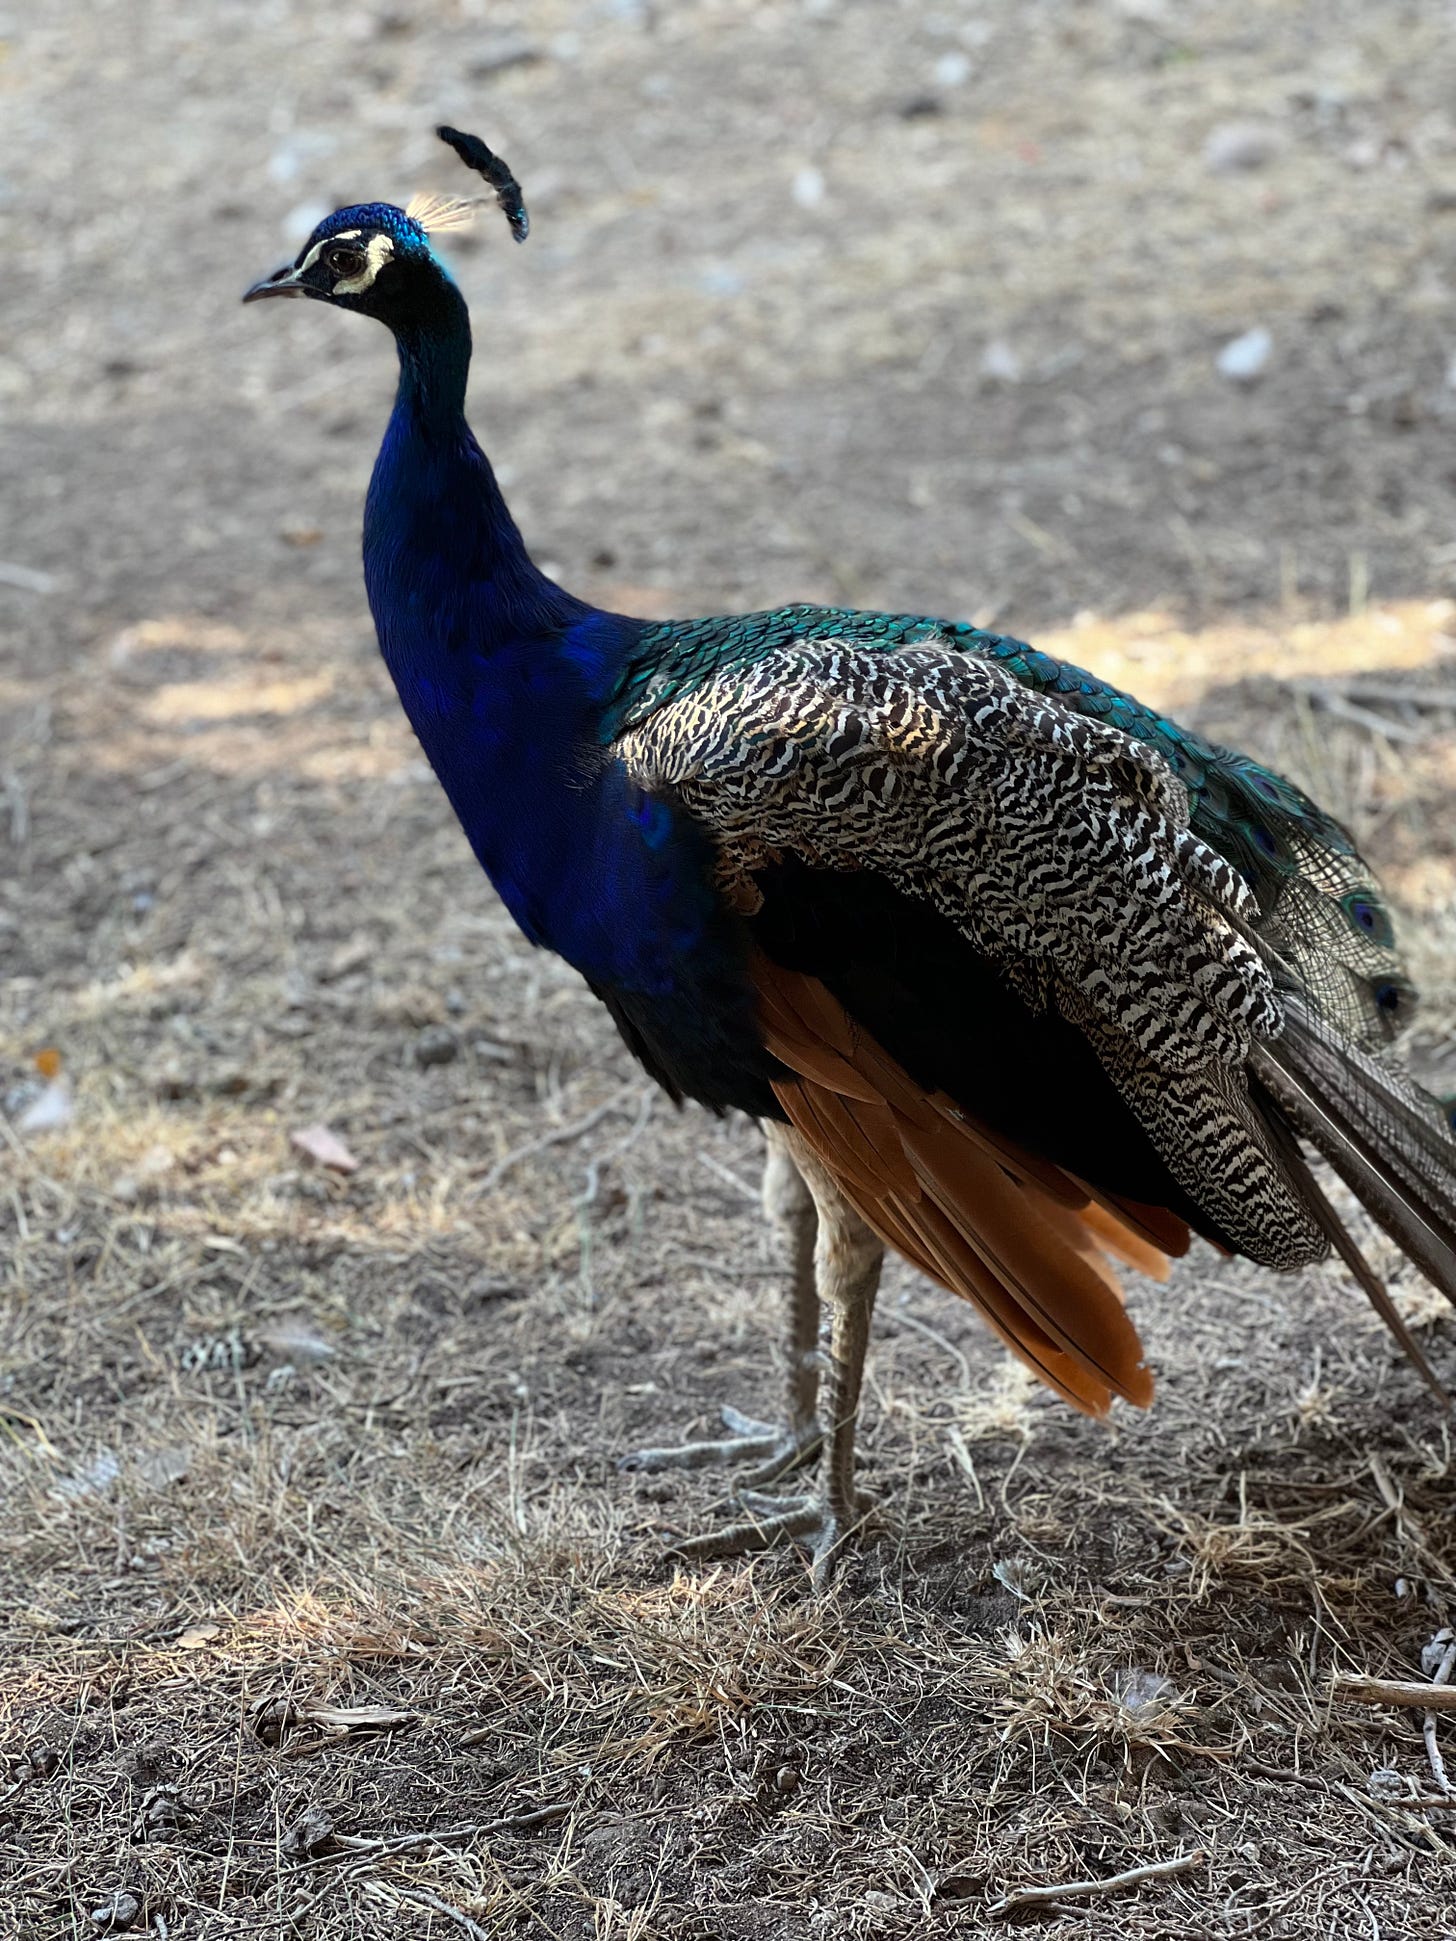 A peacook with deep blue and green and brown plumage